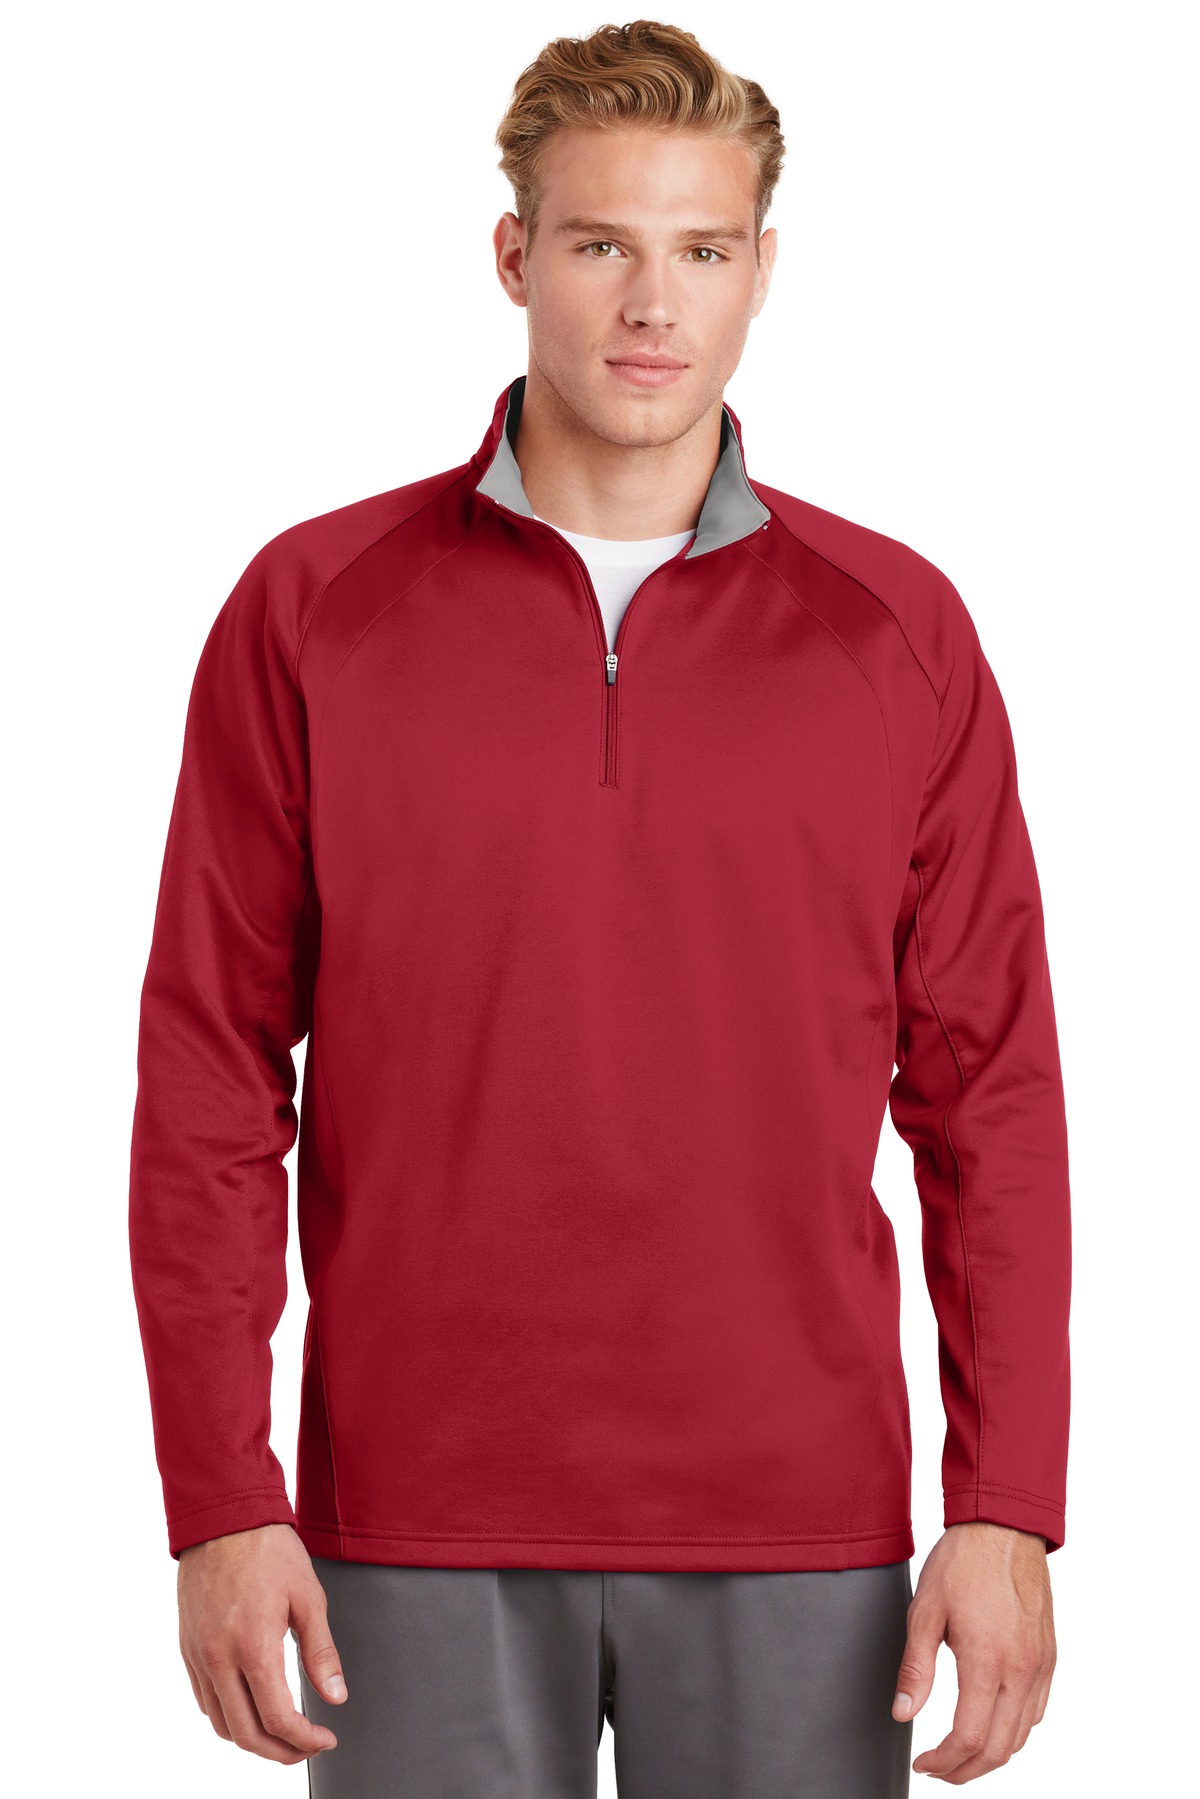 MEN'S CLASSIC 1/4 ZIP XS-3XL SOLID LONG SLEEVE PULLOVER MOISTURE WICKING